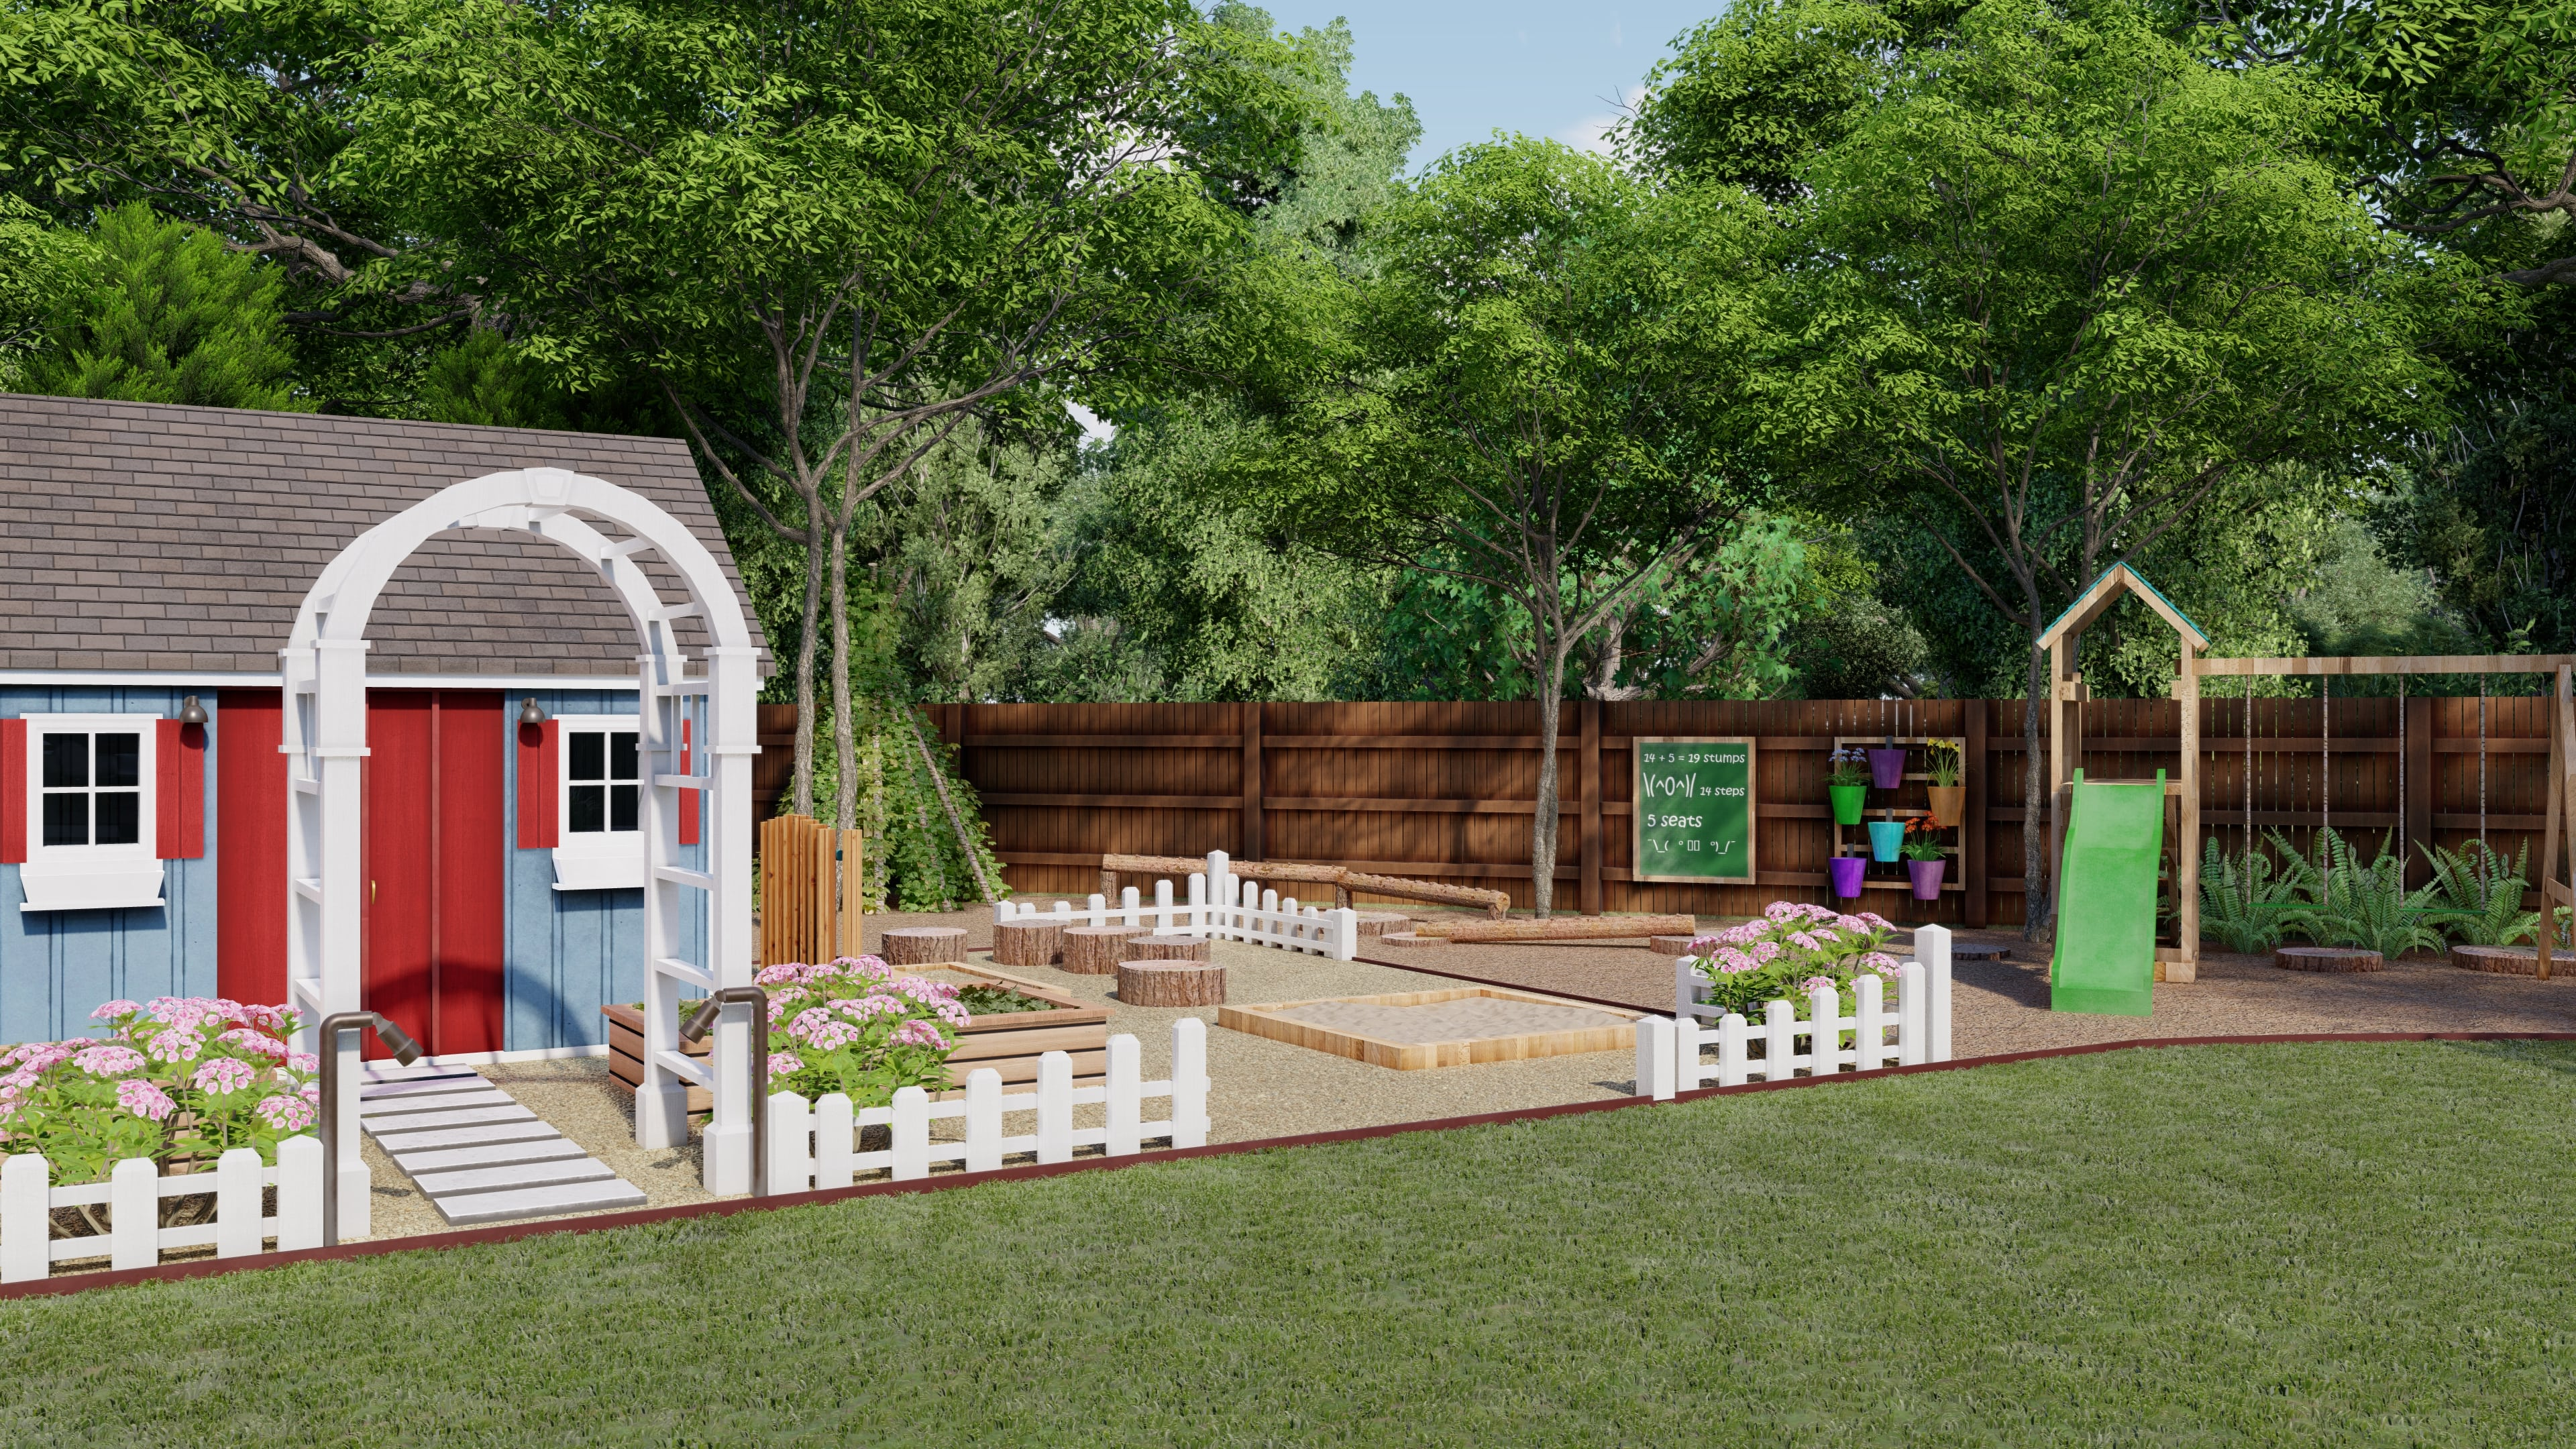 A backyard space for the kids with chalkboards, container planting, kids playhouse and swings